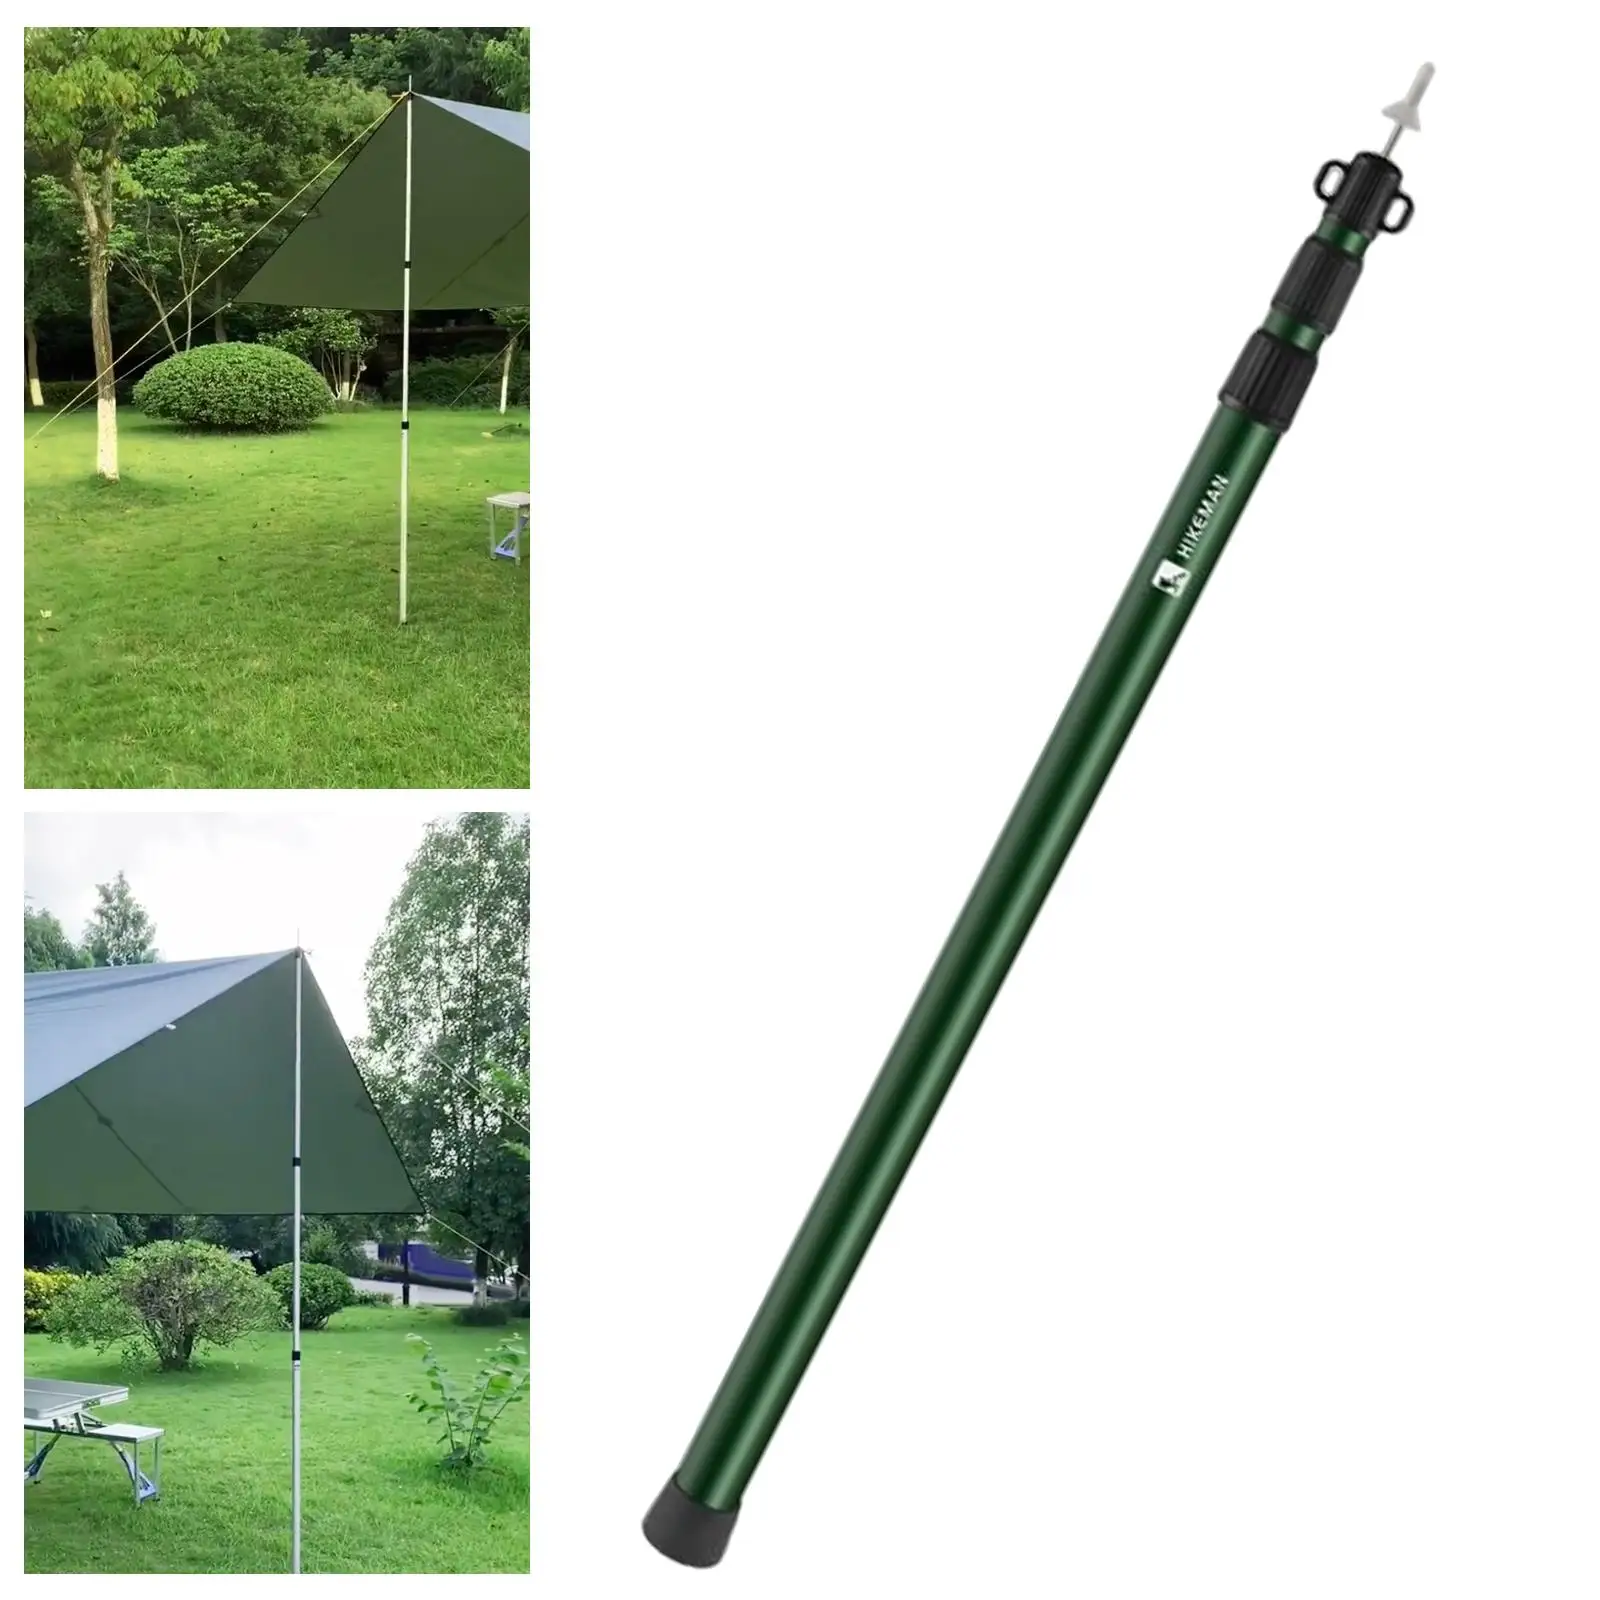 Telescoping Tarp Poles Adjustable Tent Poles Aluminum Camping Tent Rods Removable Awning Poles Camping Top